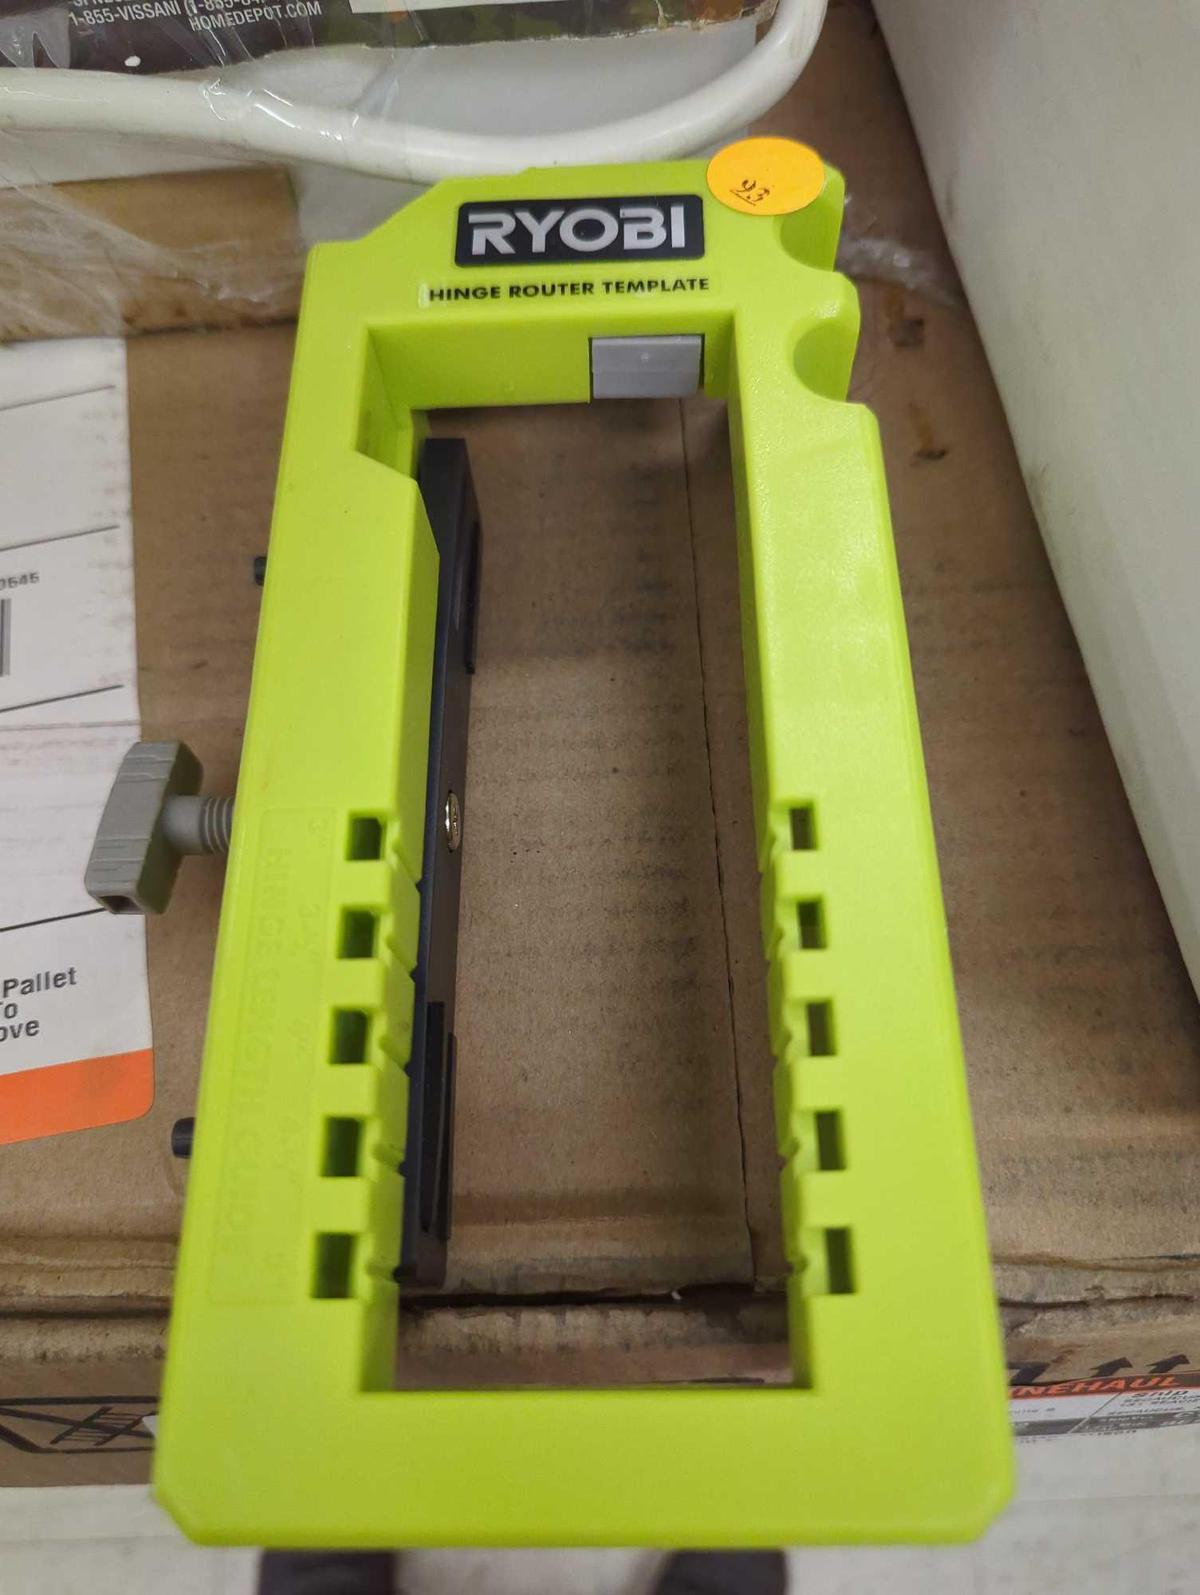 Ryobi hinge router template. Has hinge length guide on the side.